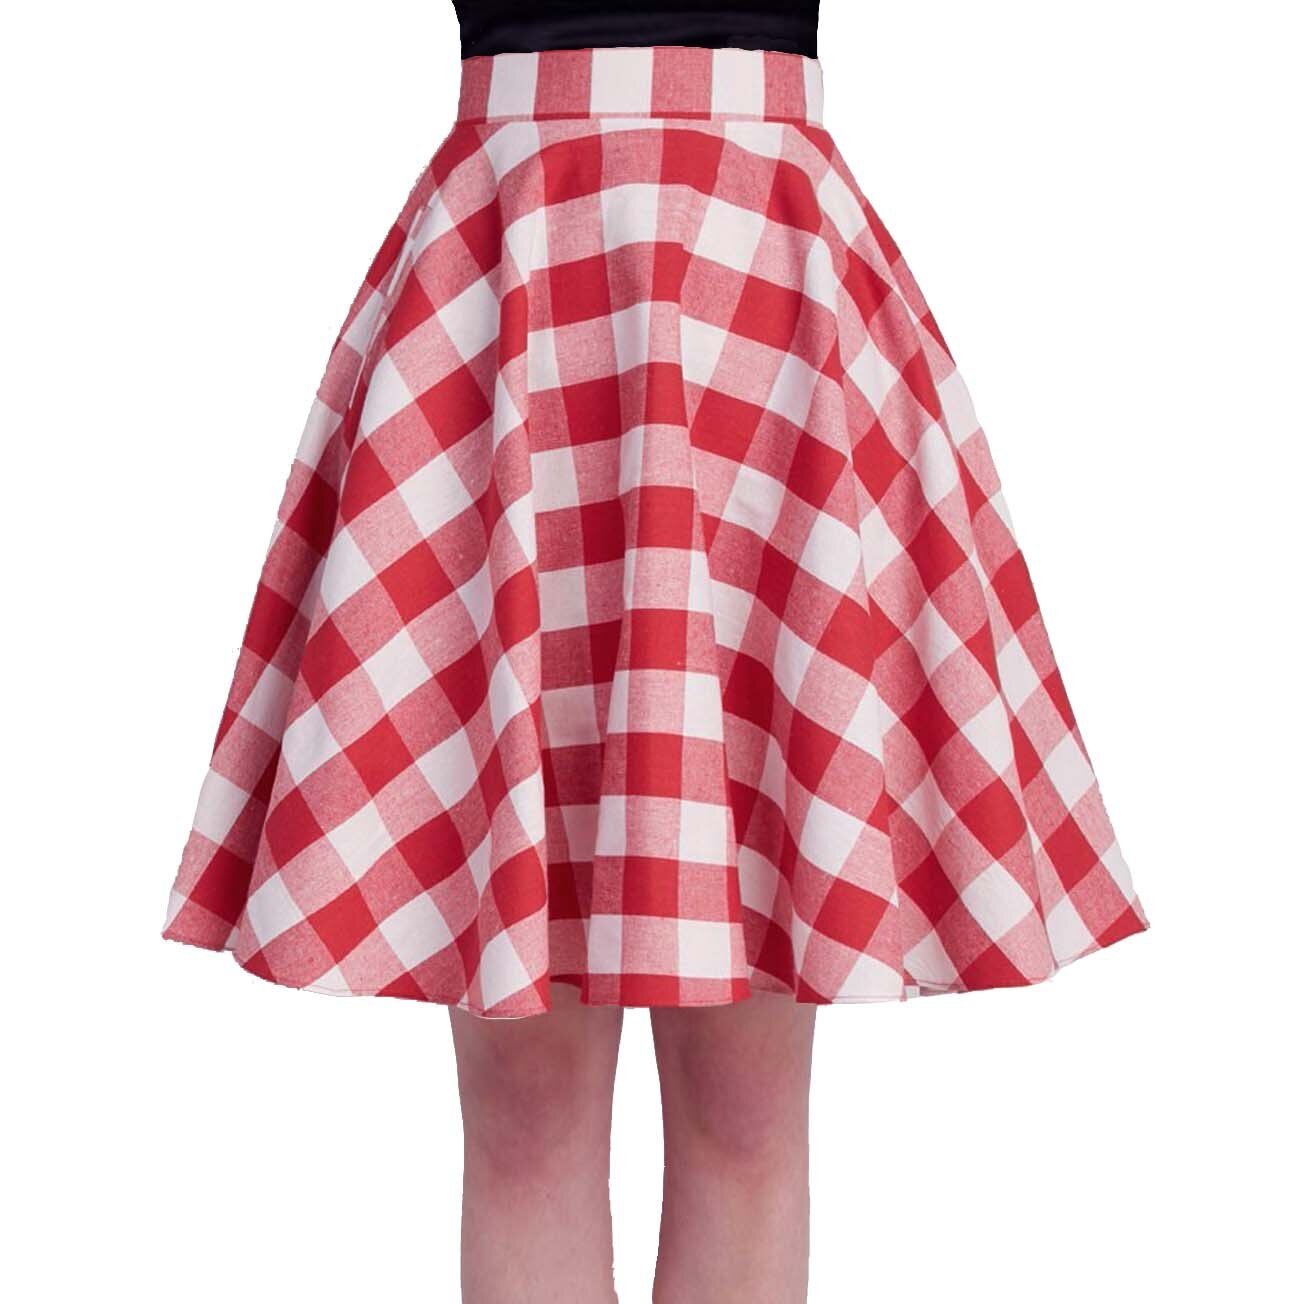 2021 School Checkered Plaid Casual Skirt Women Red and White 50s High Waist Rockabilly Cotton Summer Vintage Swing Women Skirts